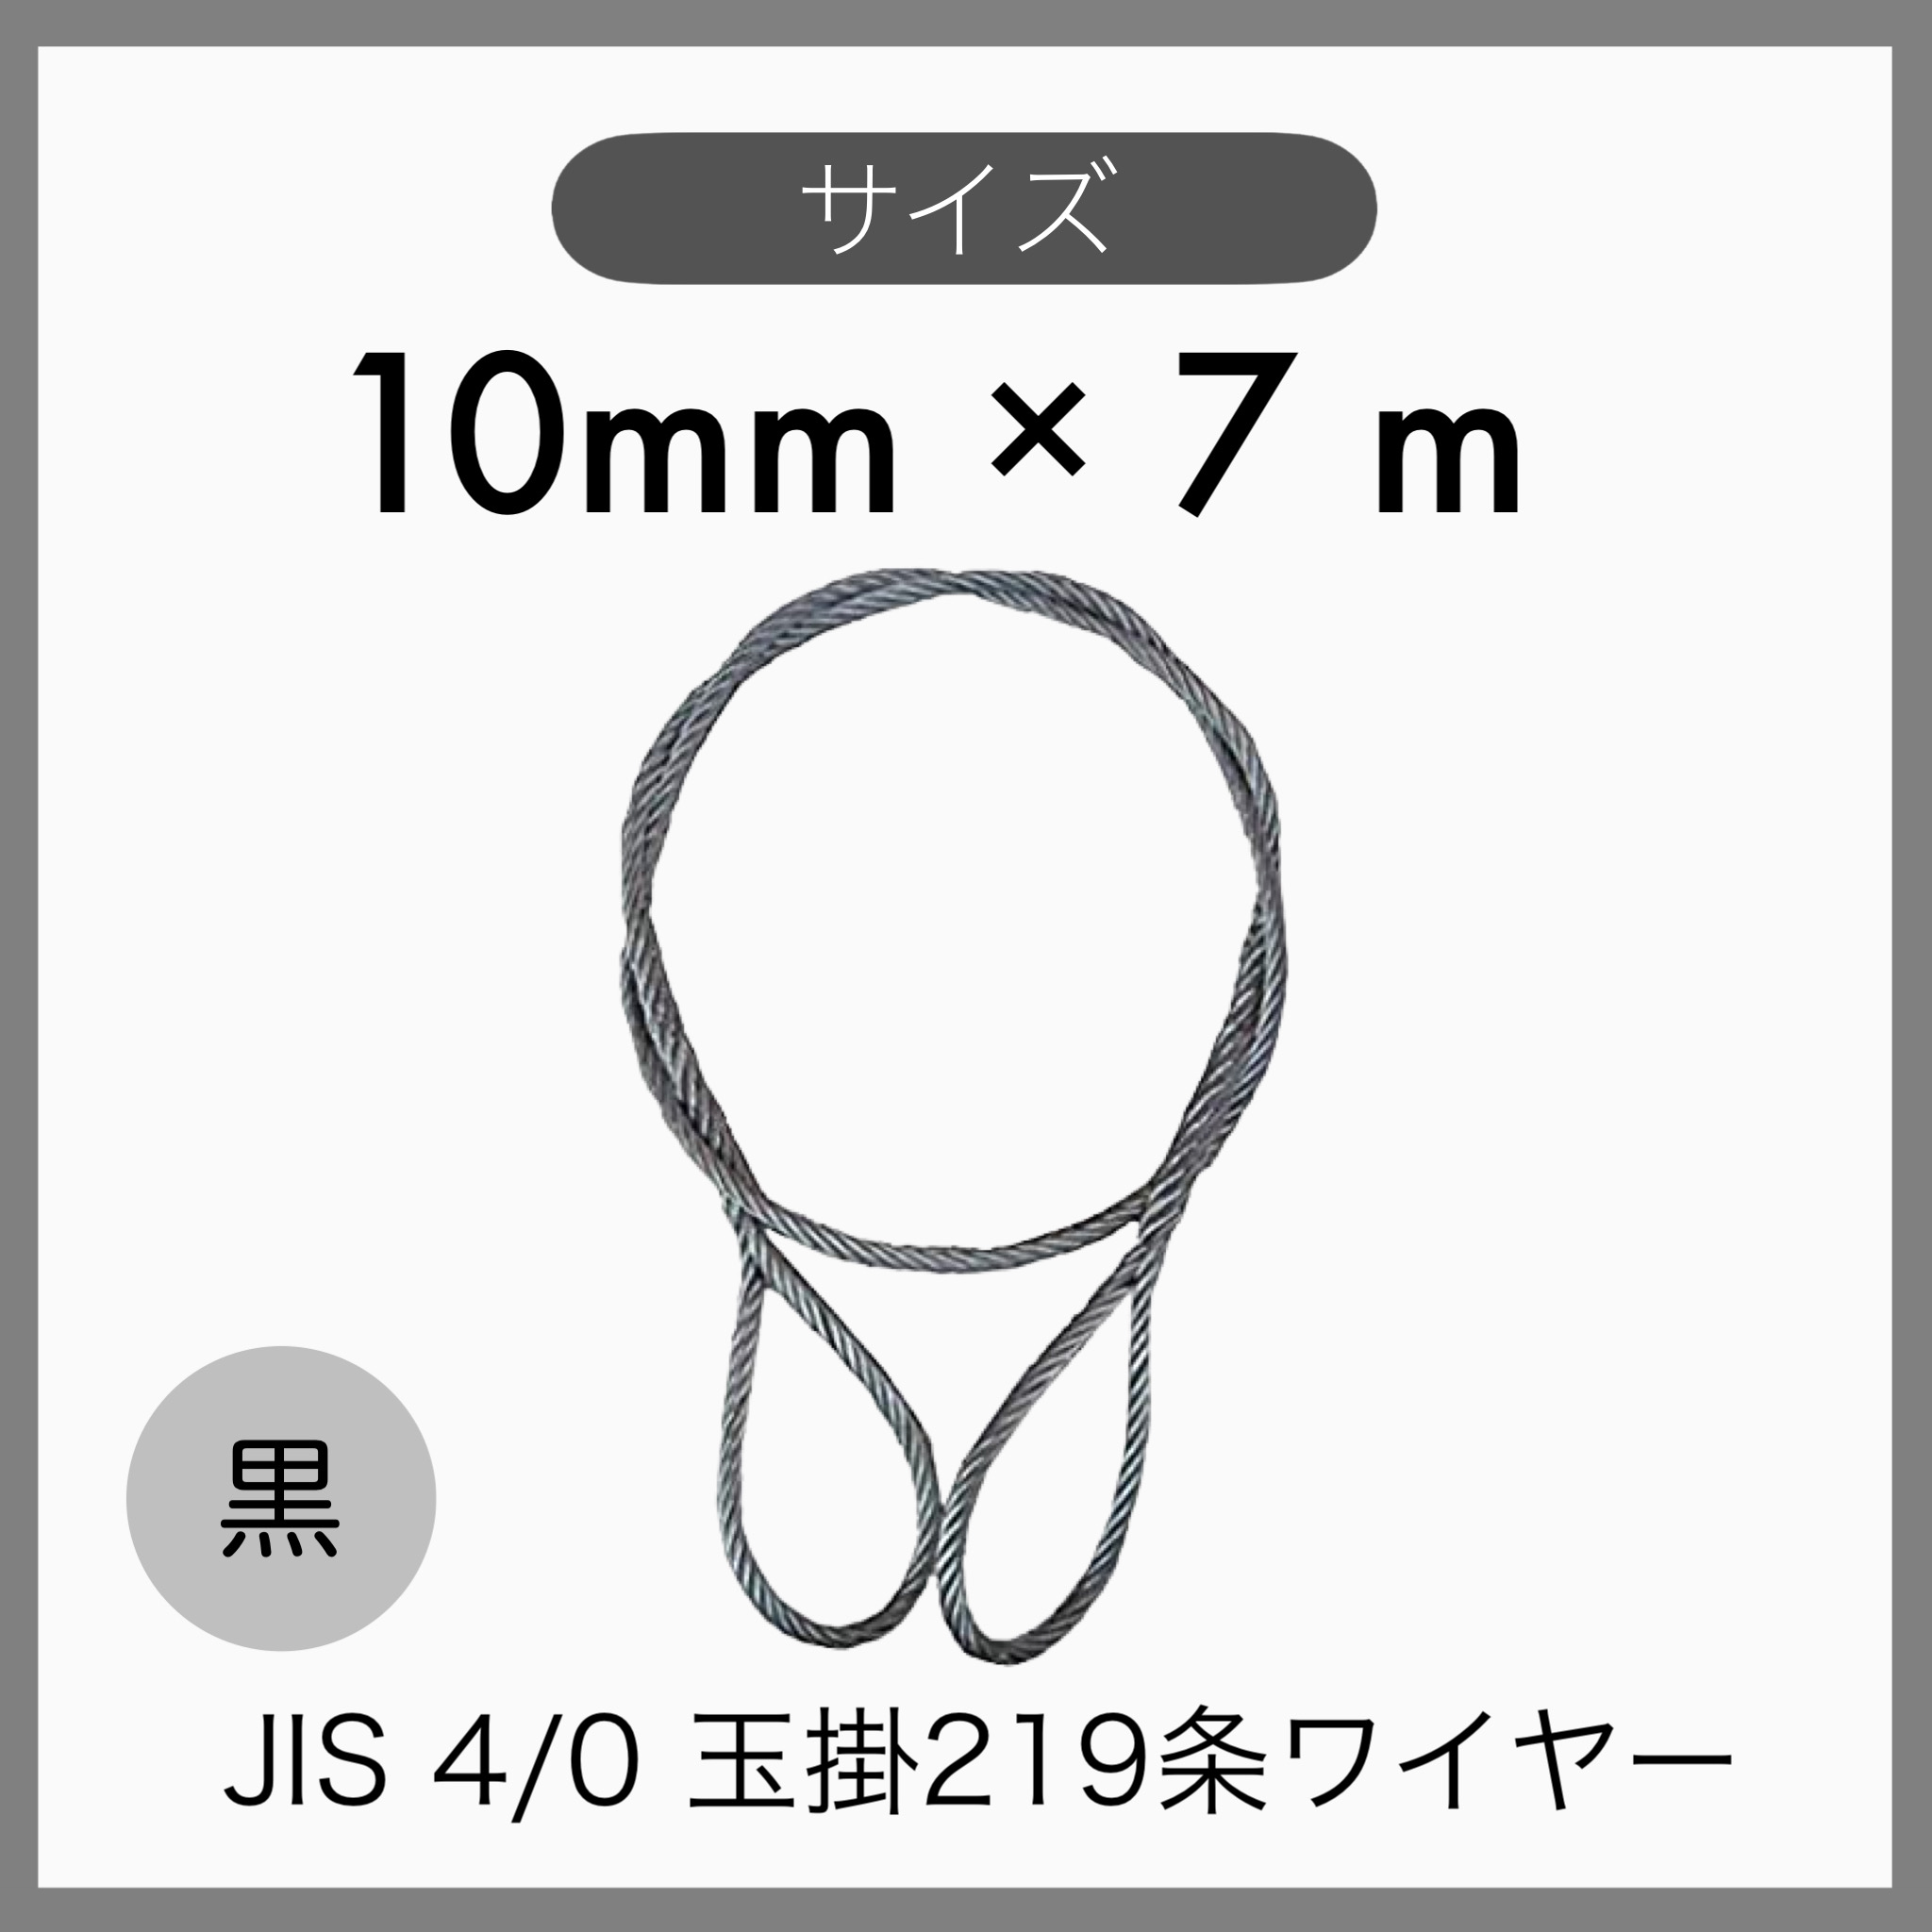 10 pcs set JIS O/O black sphere .. wire sphere ..219 article wire knitting imported goods 10mm×7m